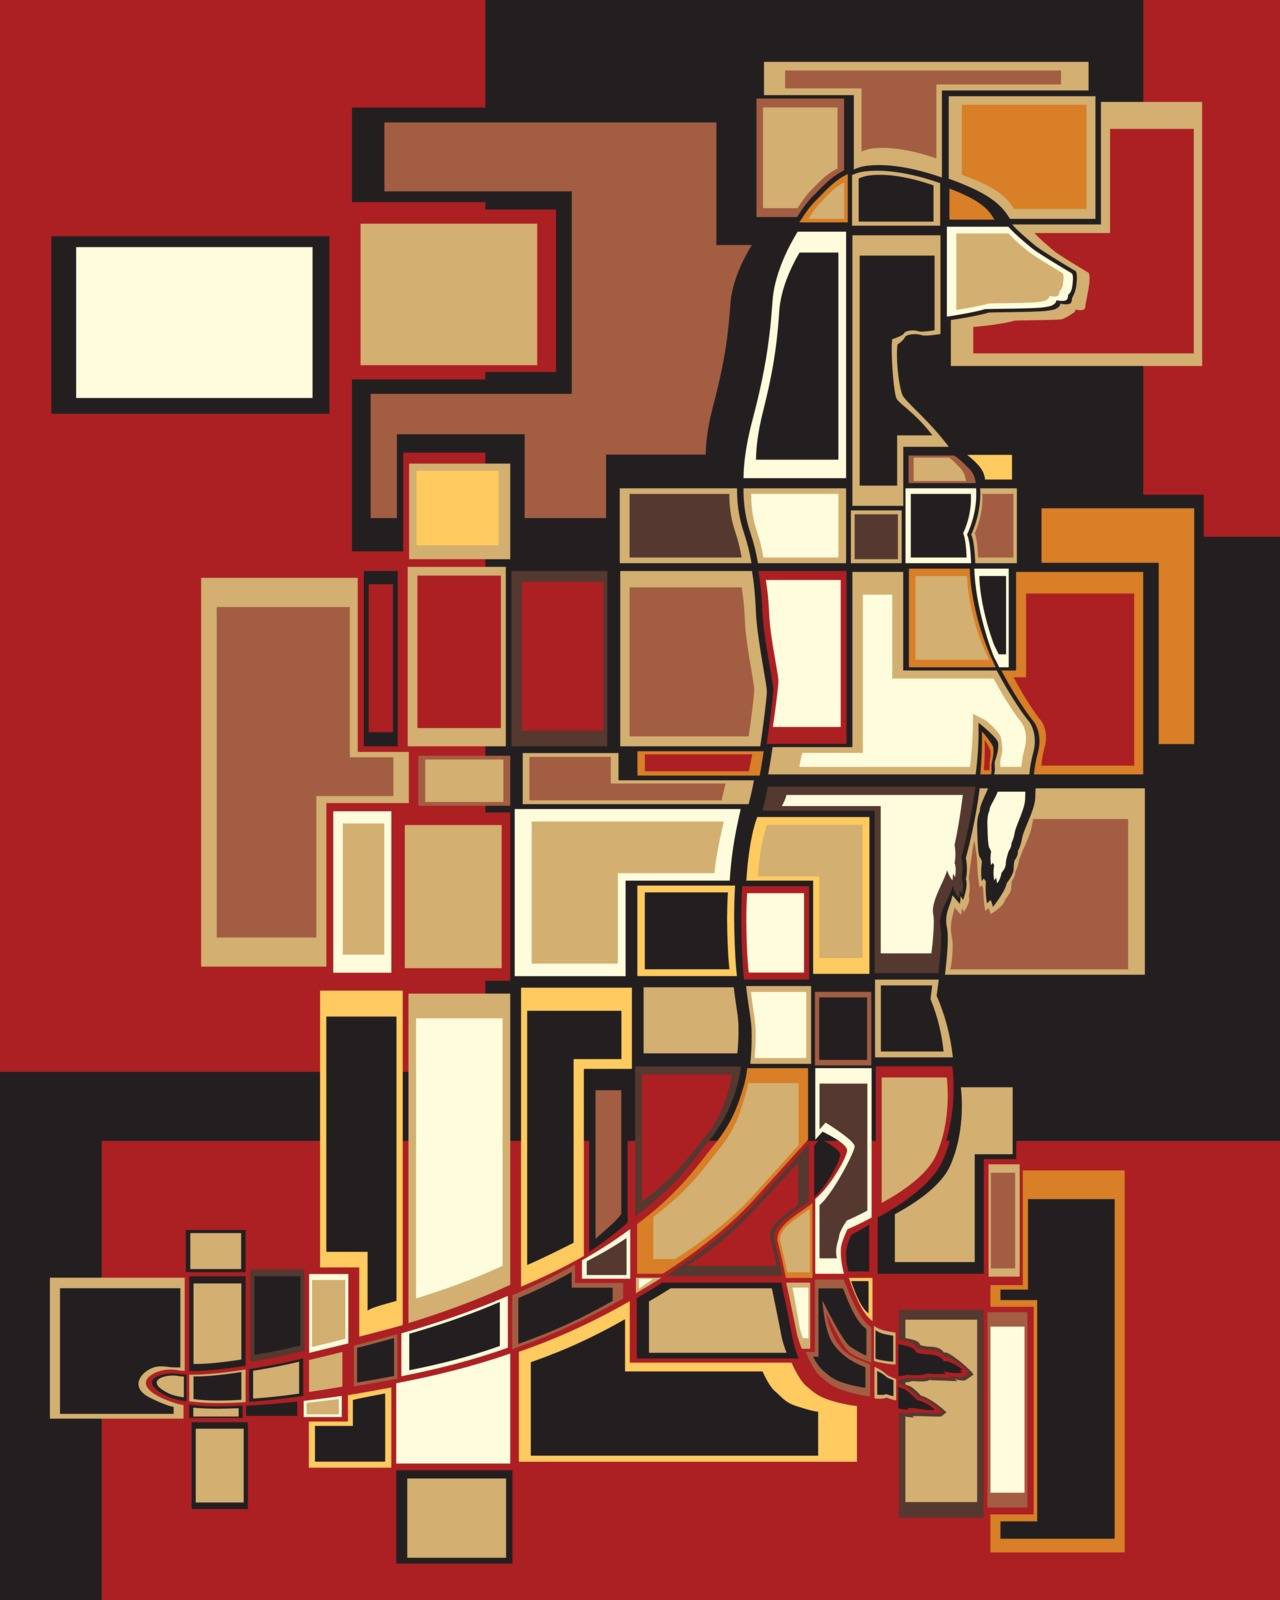 Colorful eps8 editable vector abstract mosaic illustration of a standing meerkat